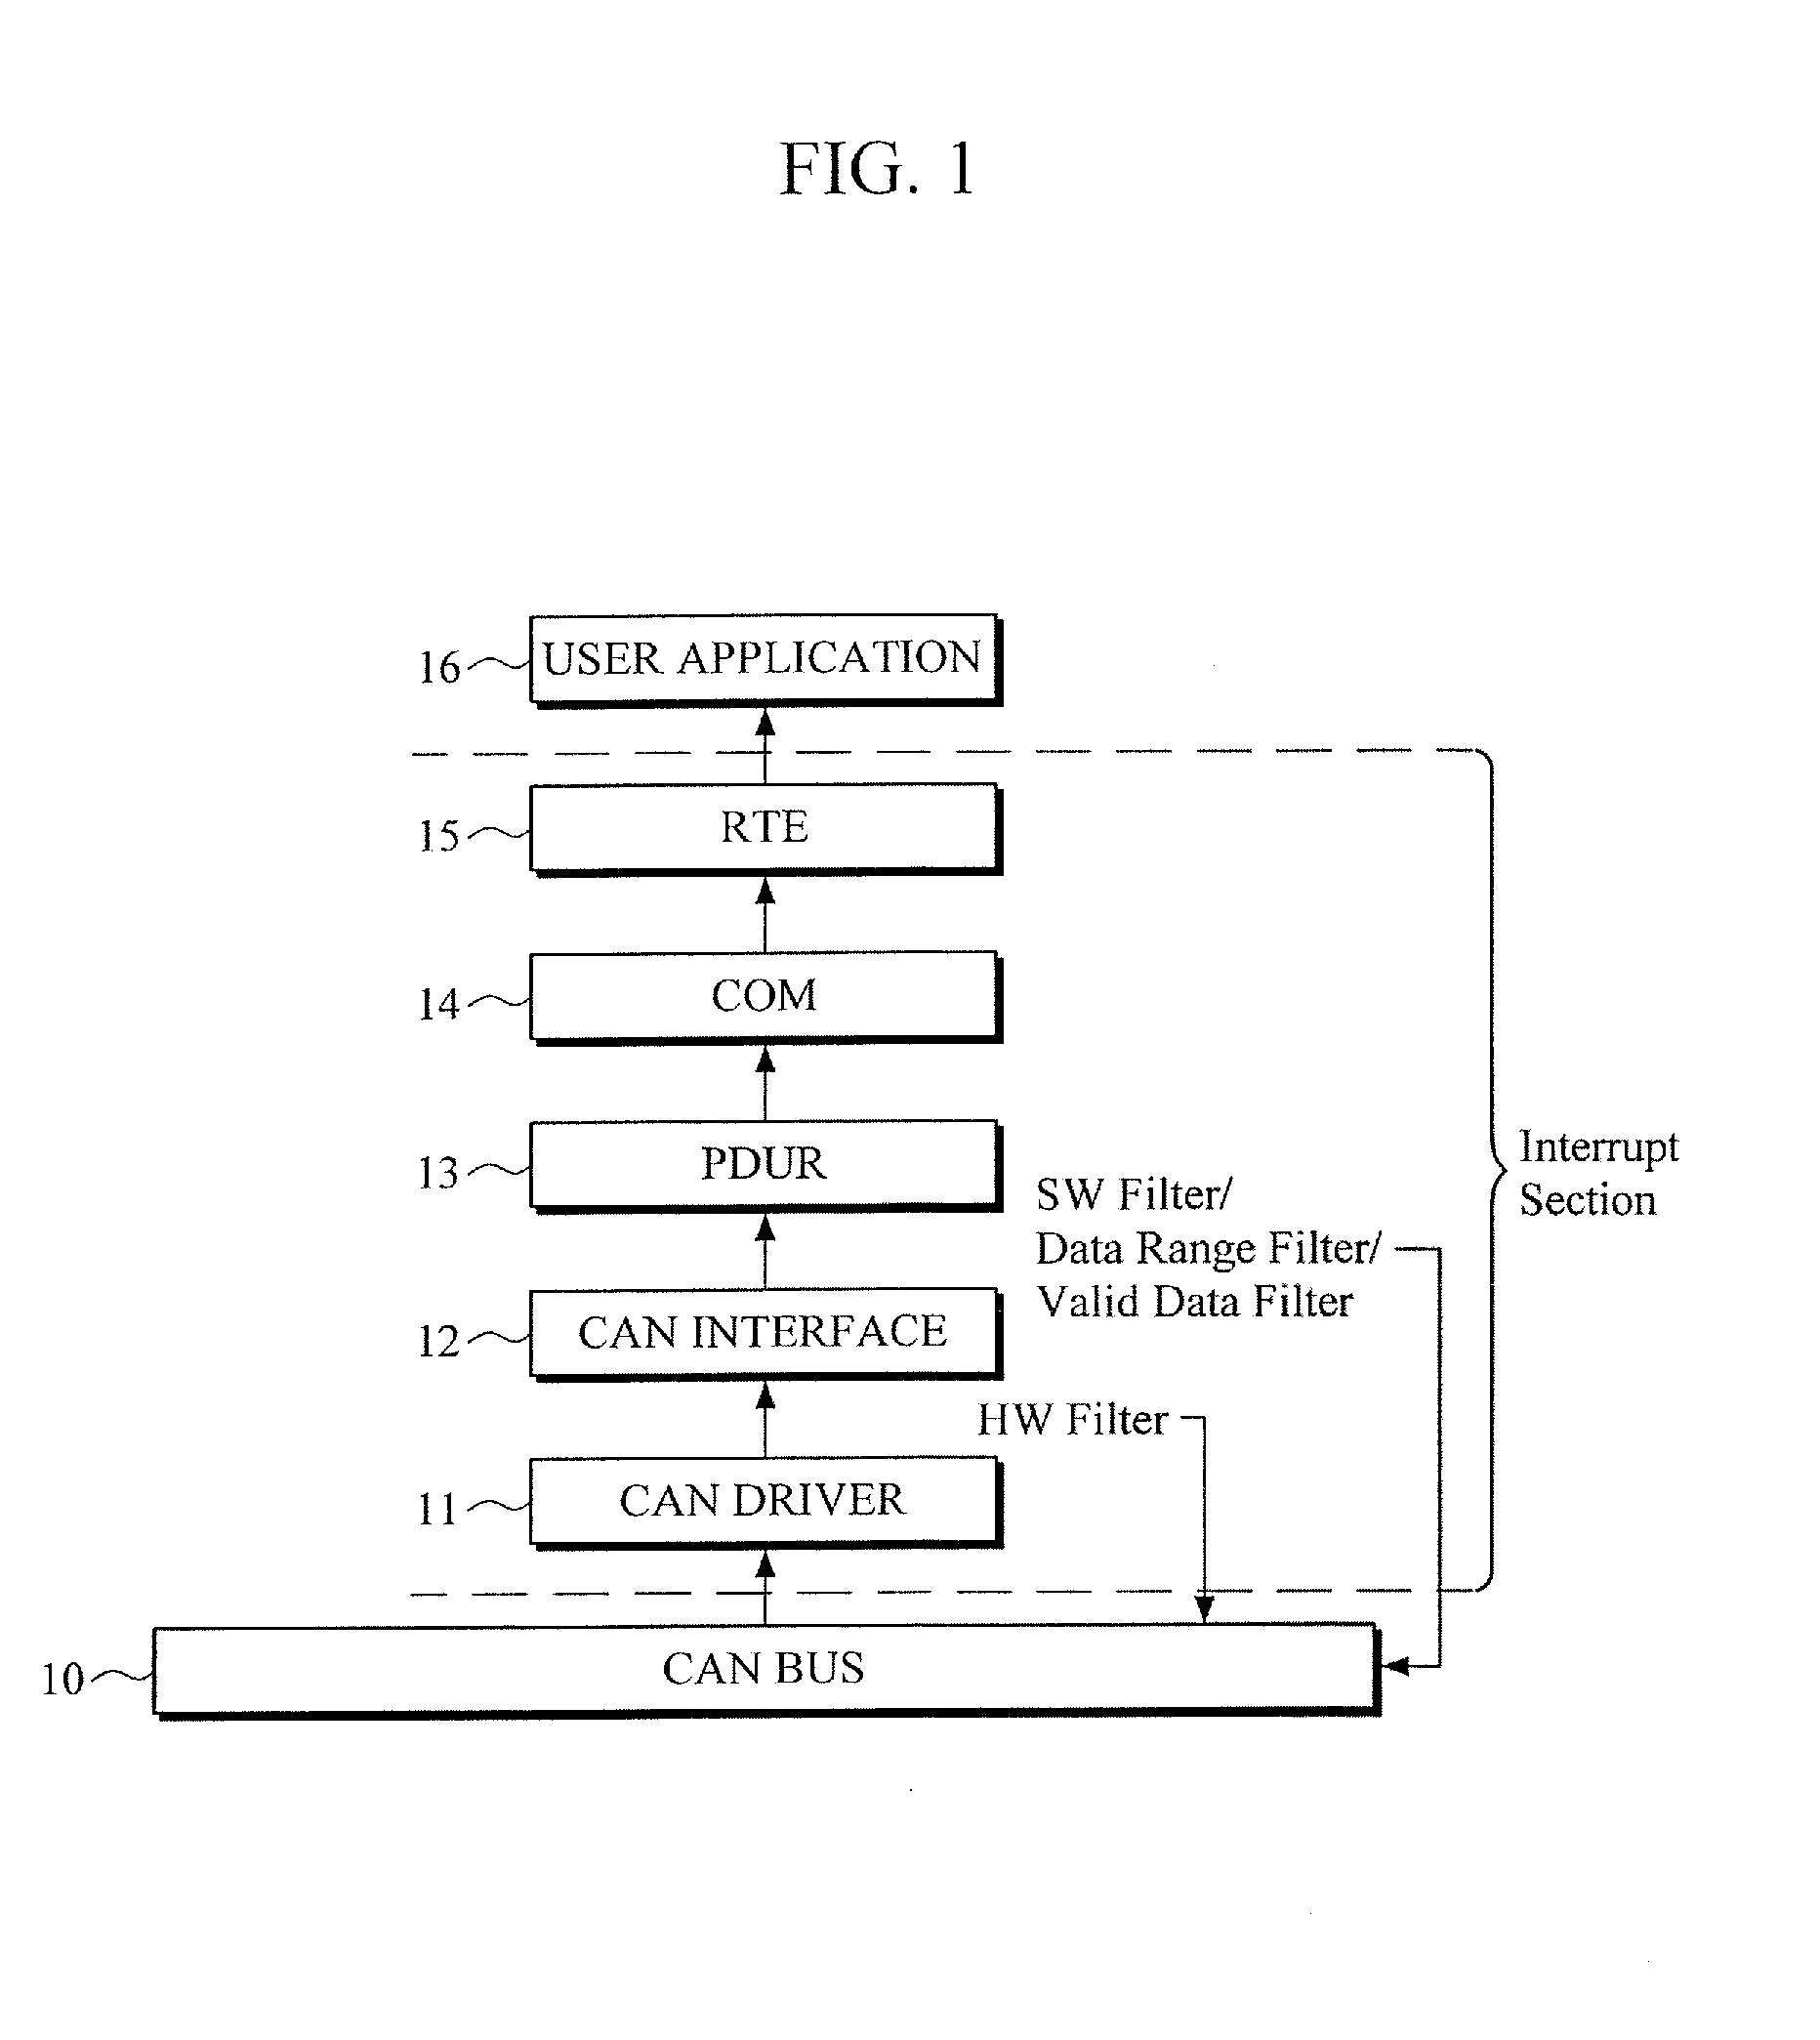 Automotive open system architecture (autosar)-based communication method and communication apparatus thereof